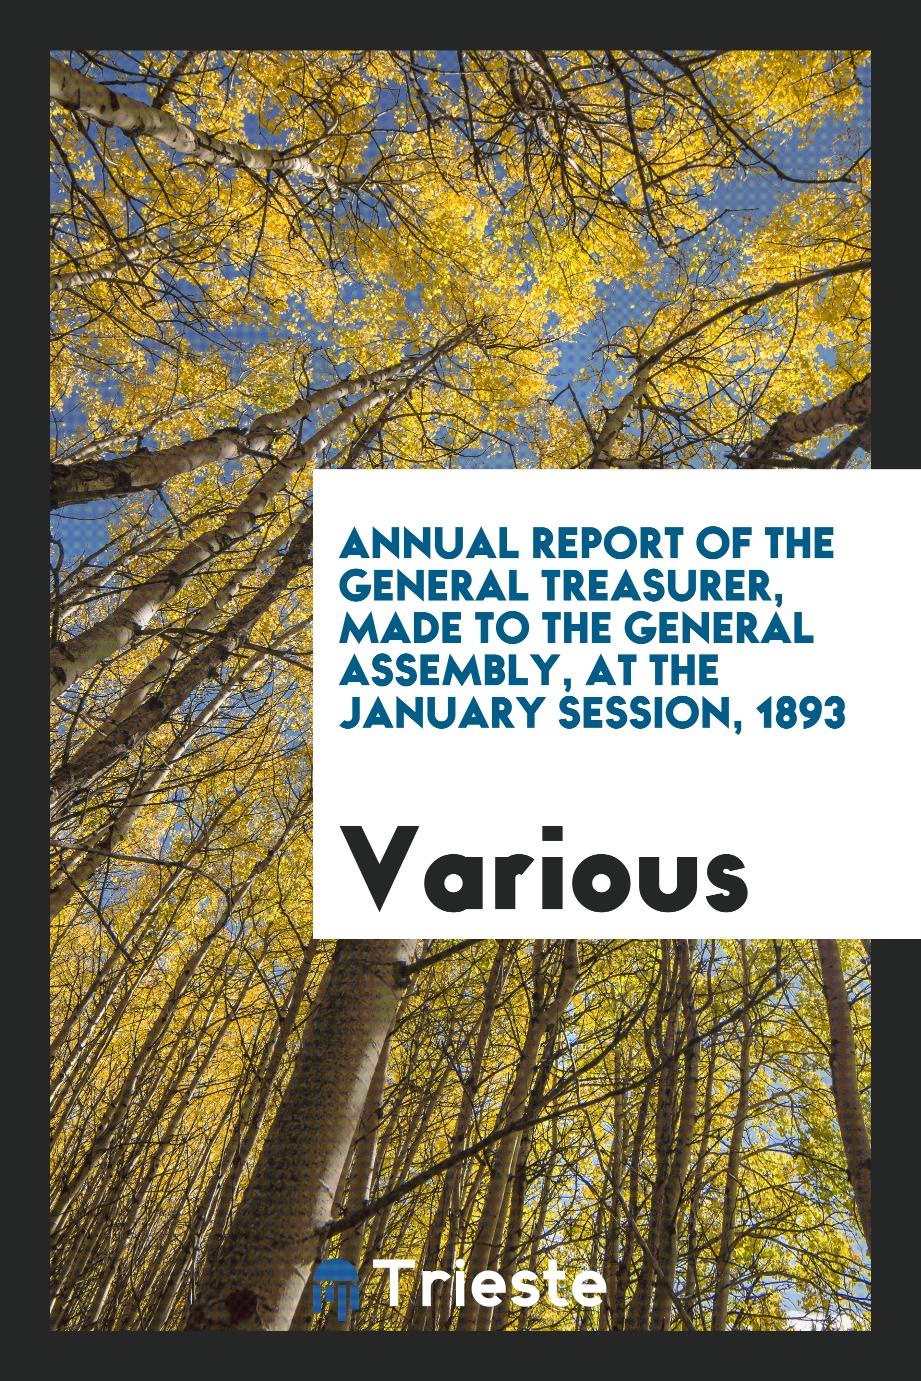 Annual Report of the General Treasurer, Made to the General Assembly, at the January session, 1893